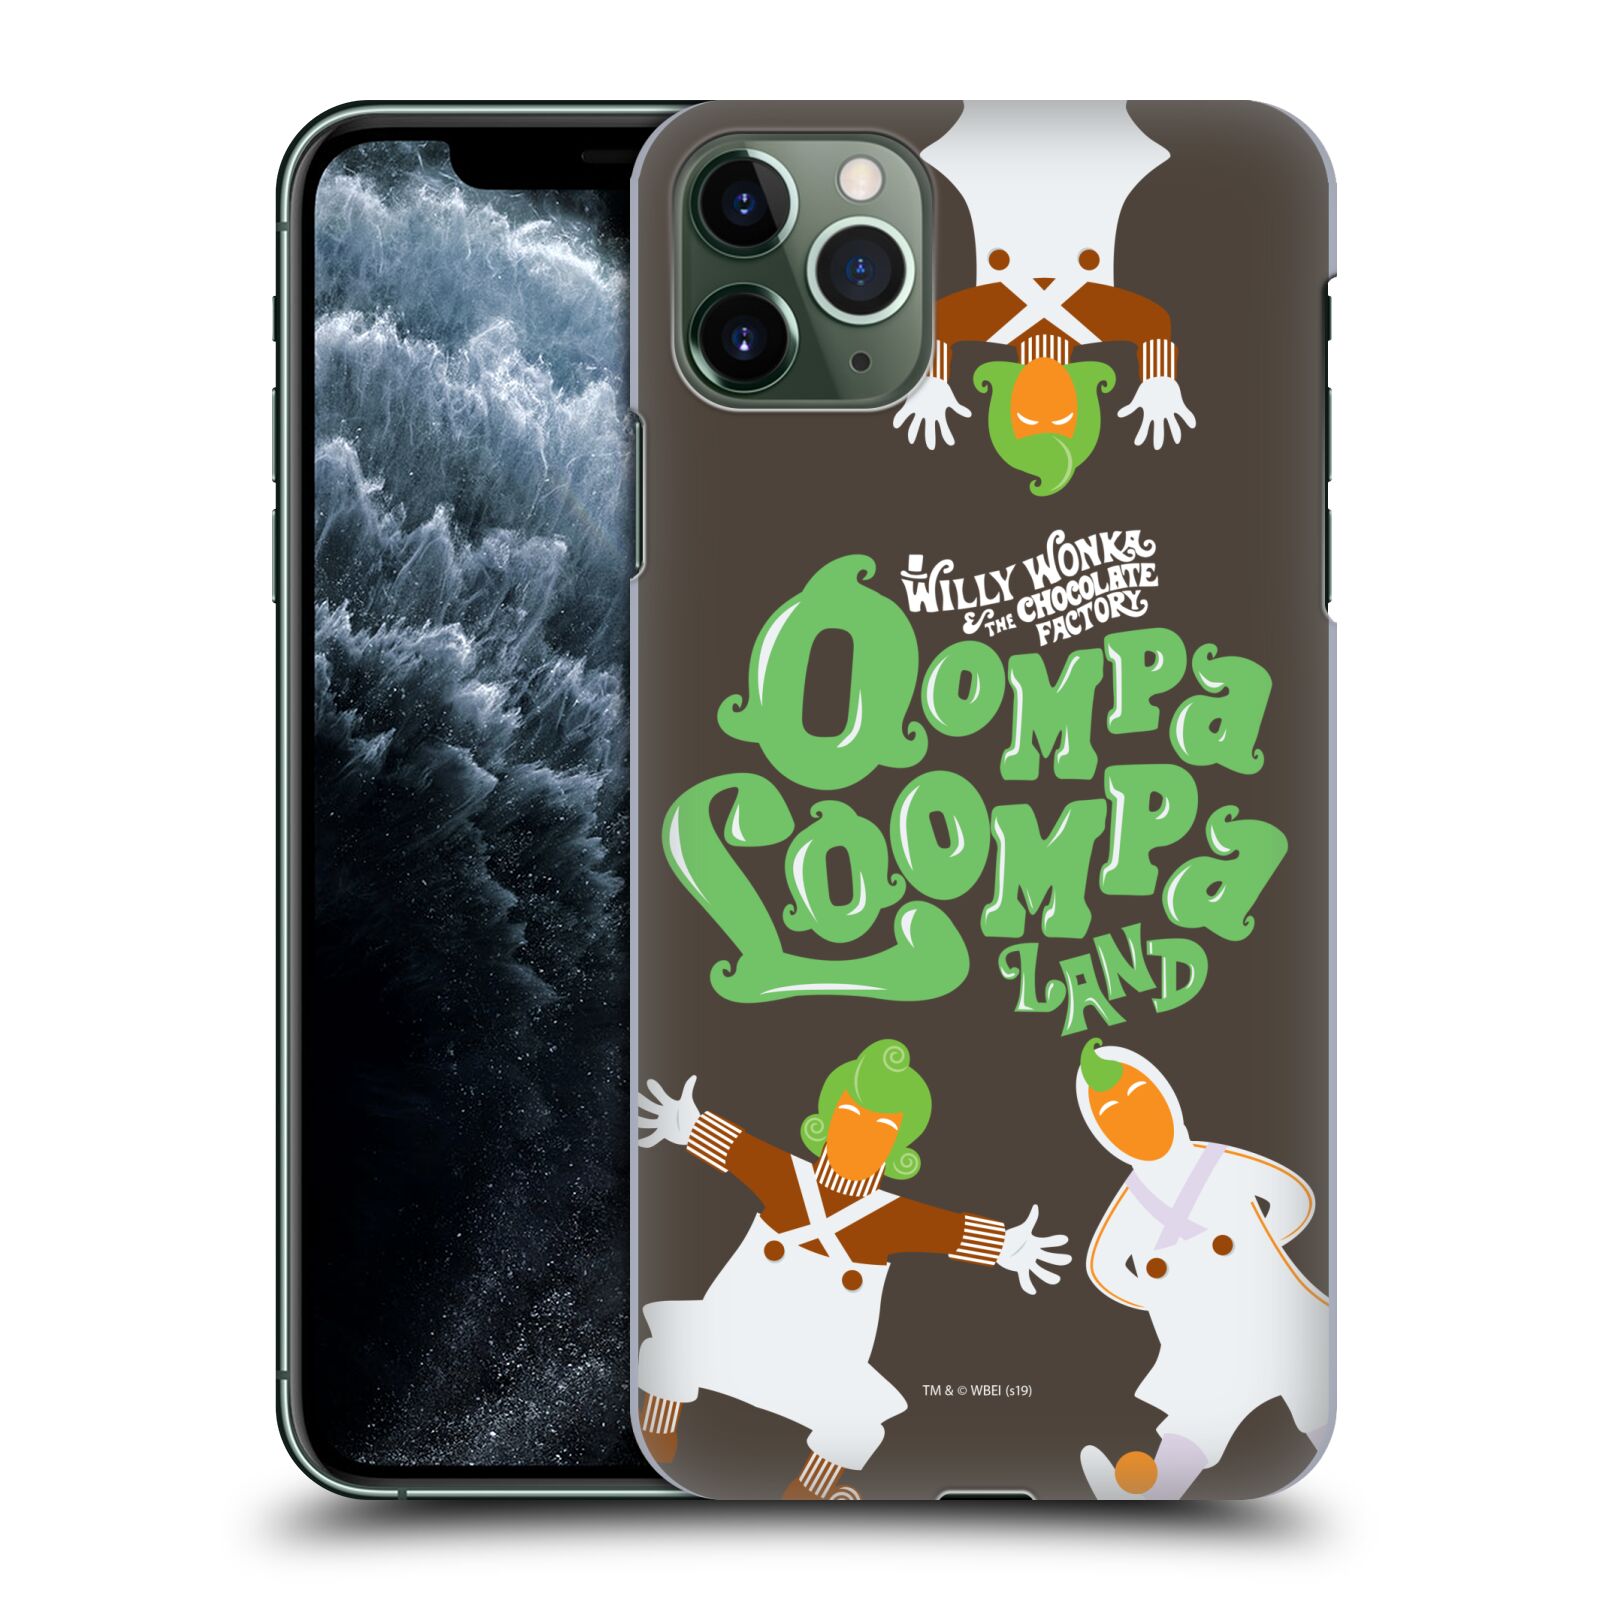 WILLY WONKA AND THE CHOCOLATE FACTORY GRAPHICS BACK CASE FOR APPLE